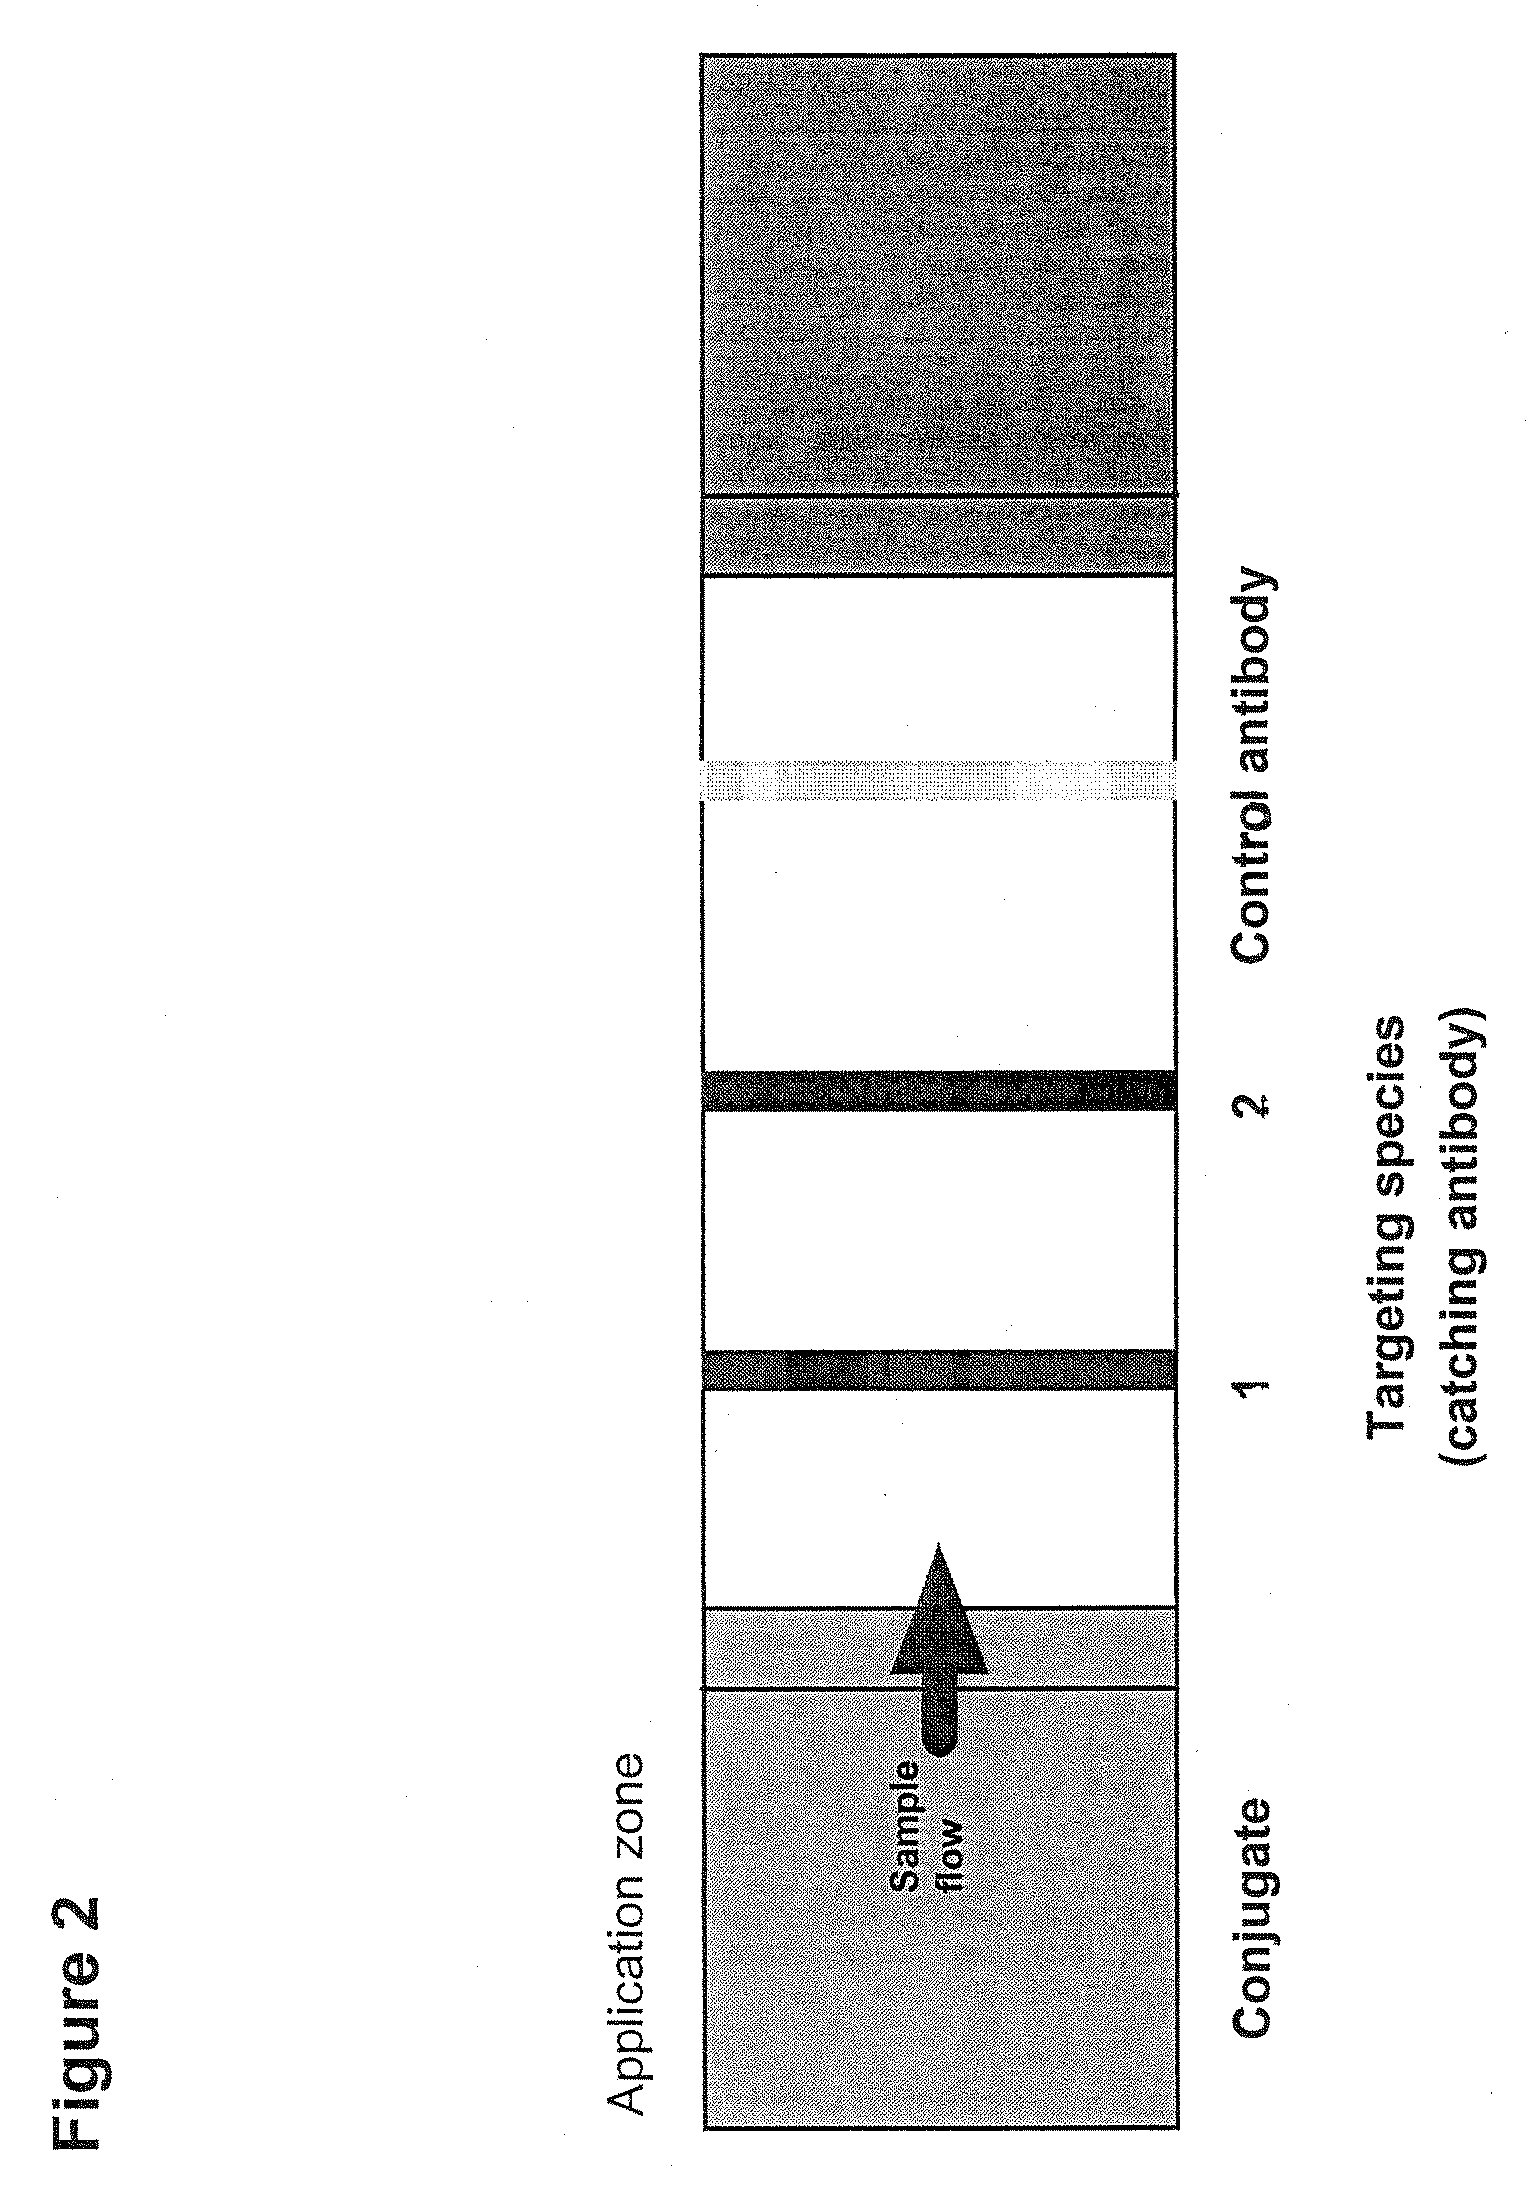 Detection of a blood coagulation activity marker in a body fluid sample